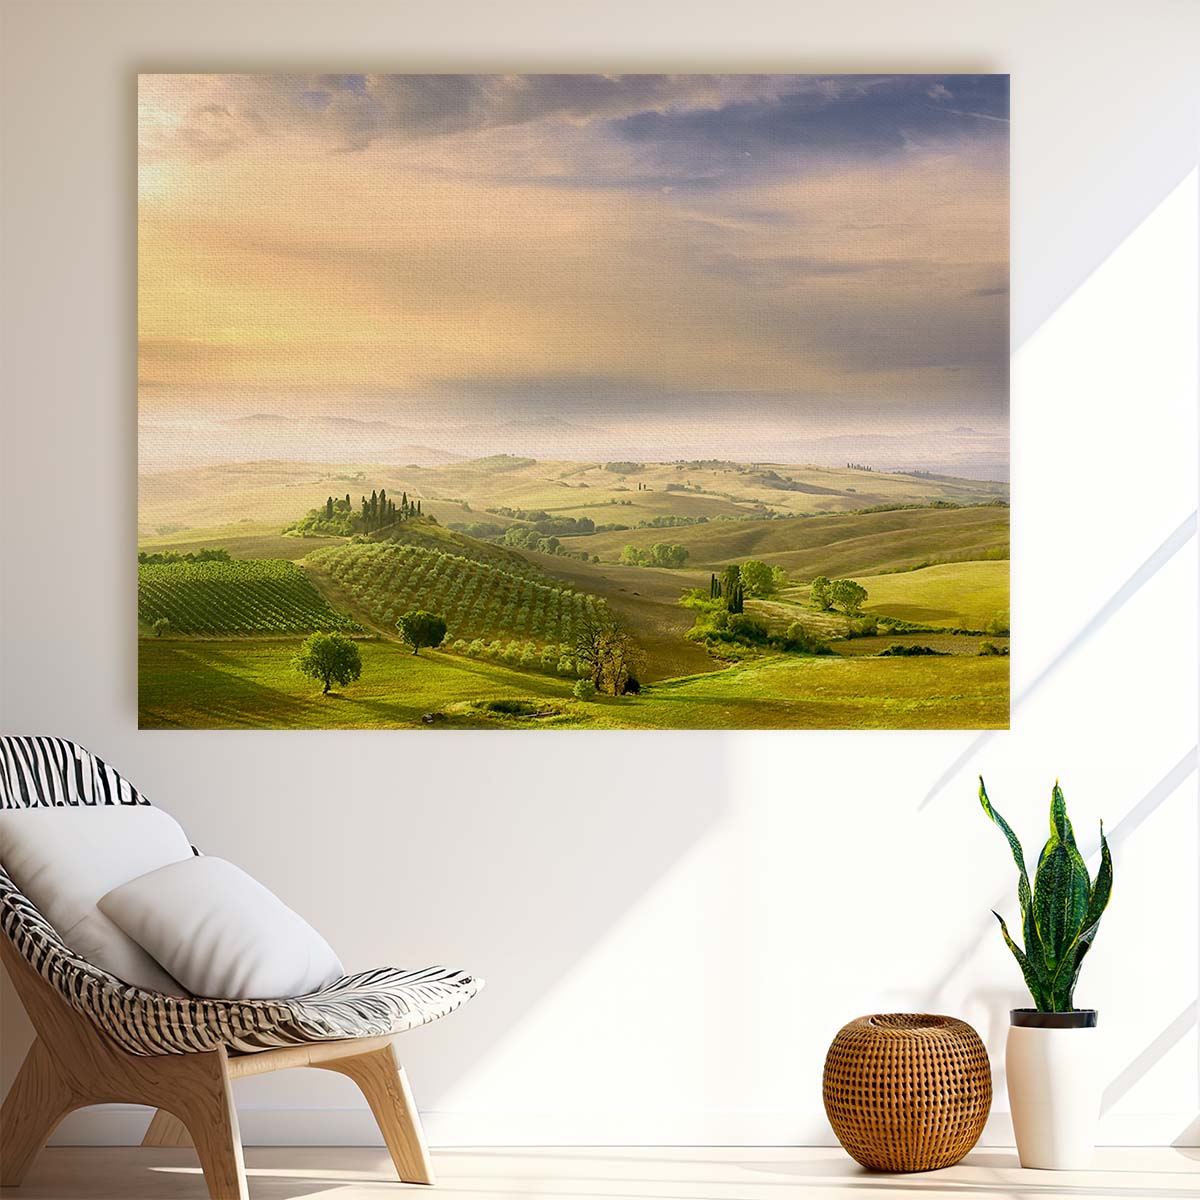 Tuscany Sunrise Lush Hills & Cypress Trees Wall Art by Luxuriance Designs. Made in USA.